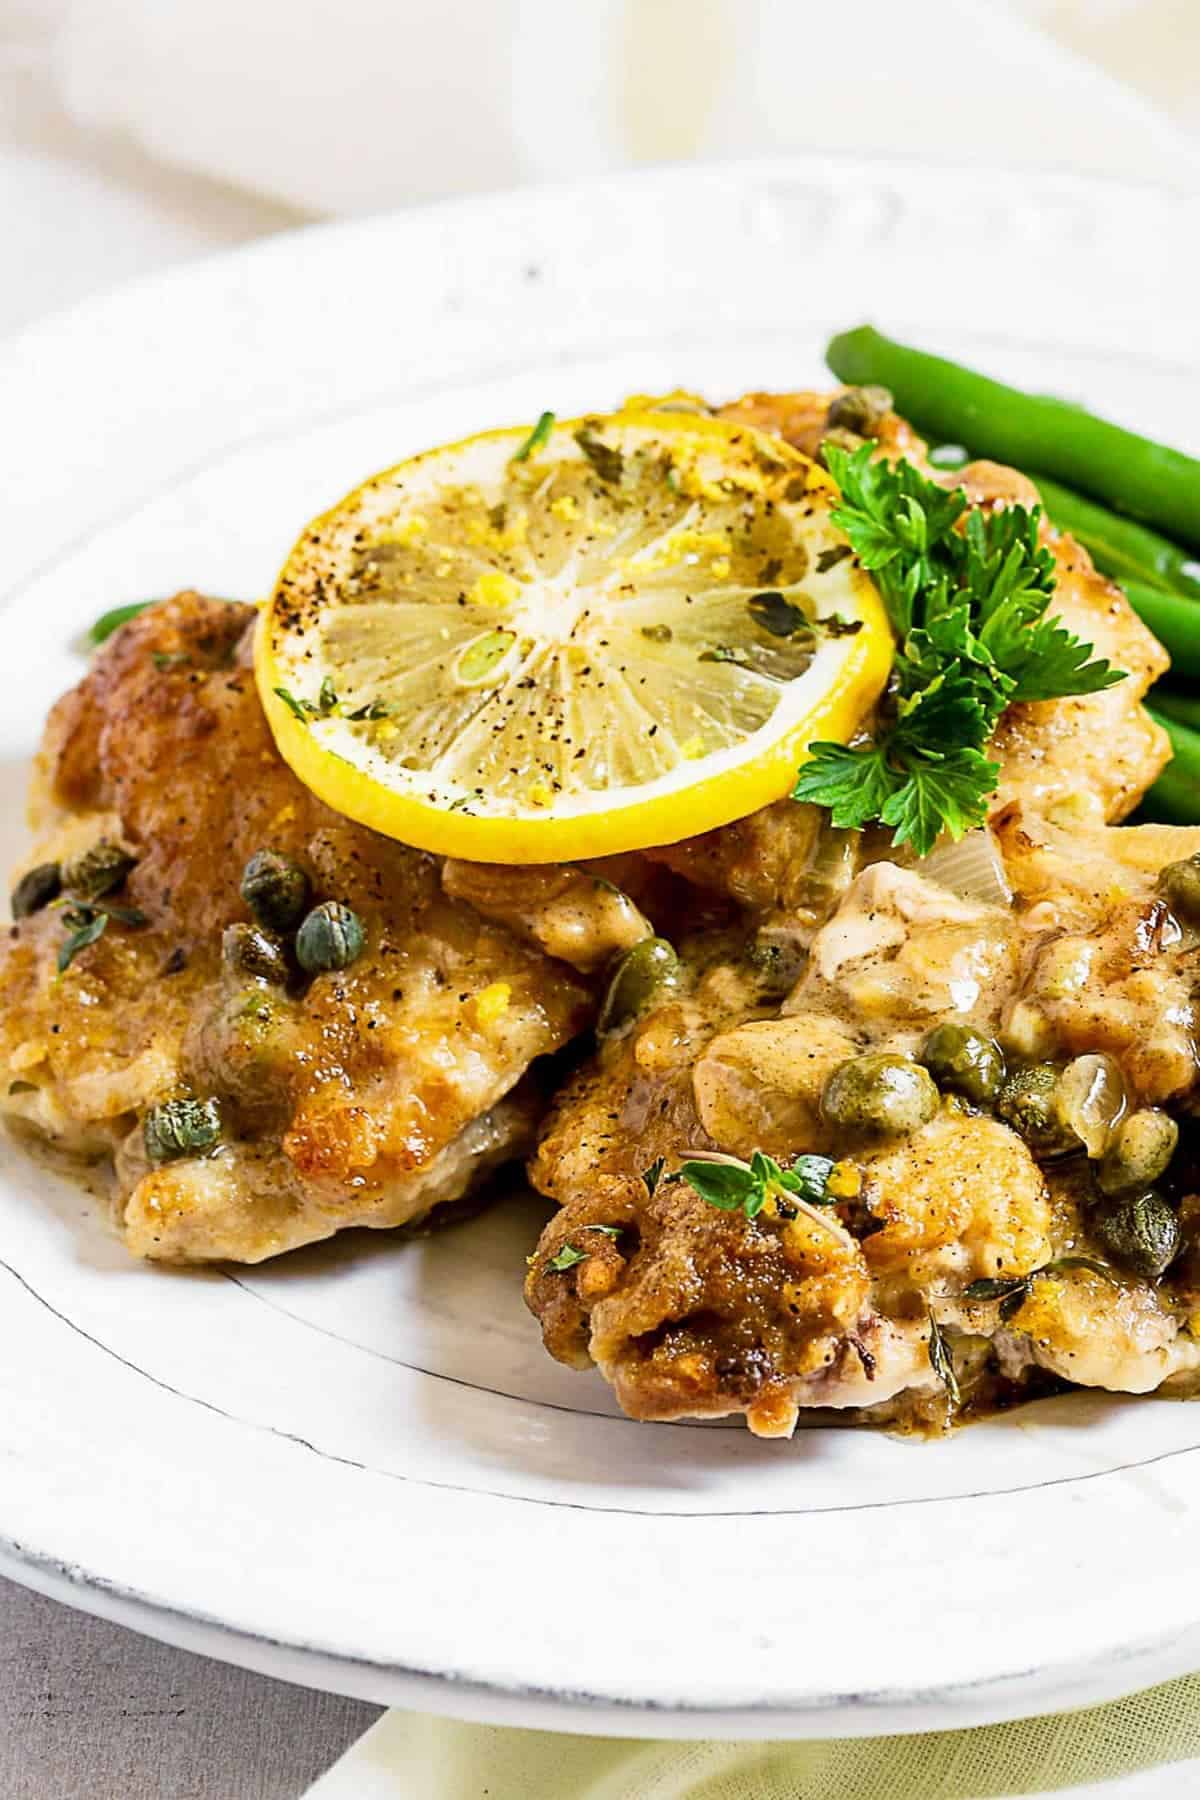 Close up of a slice of lemon on top of the chicken piccata